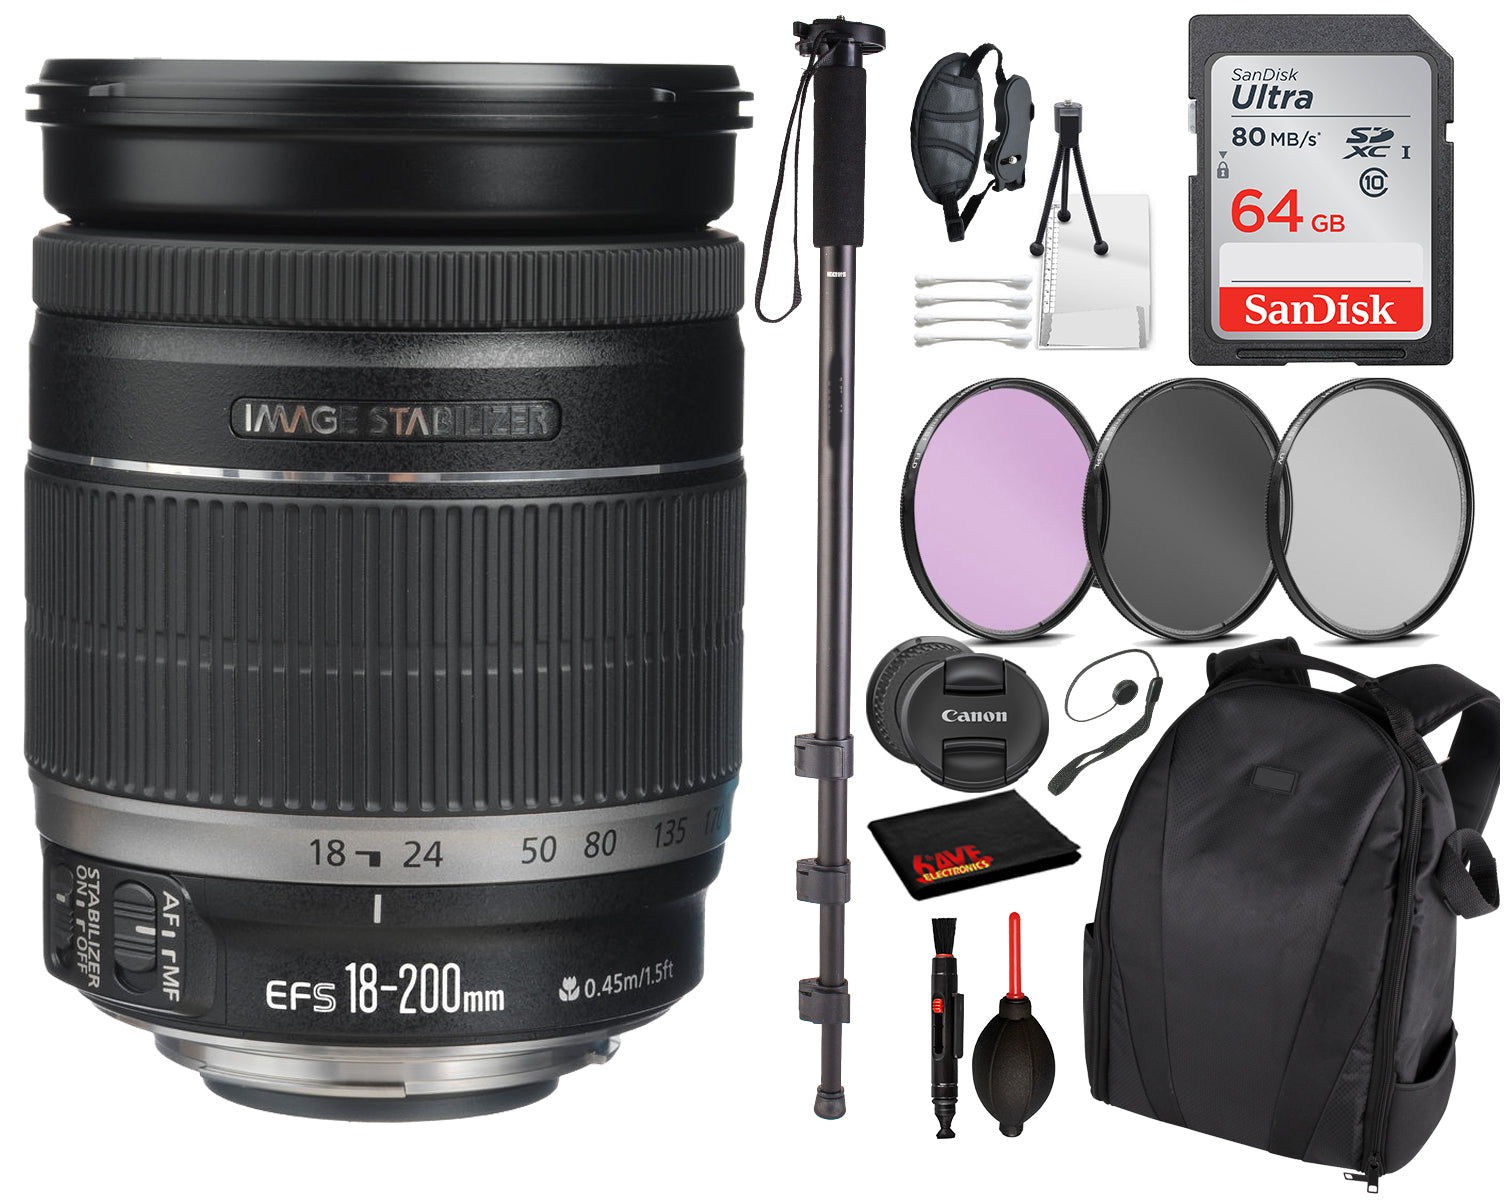 Canon EF-S 18-200mm f/3.5-5.6 IS Lens (2752B002) Essential Bundle Kit for Canon EOS - International Model No Warranty